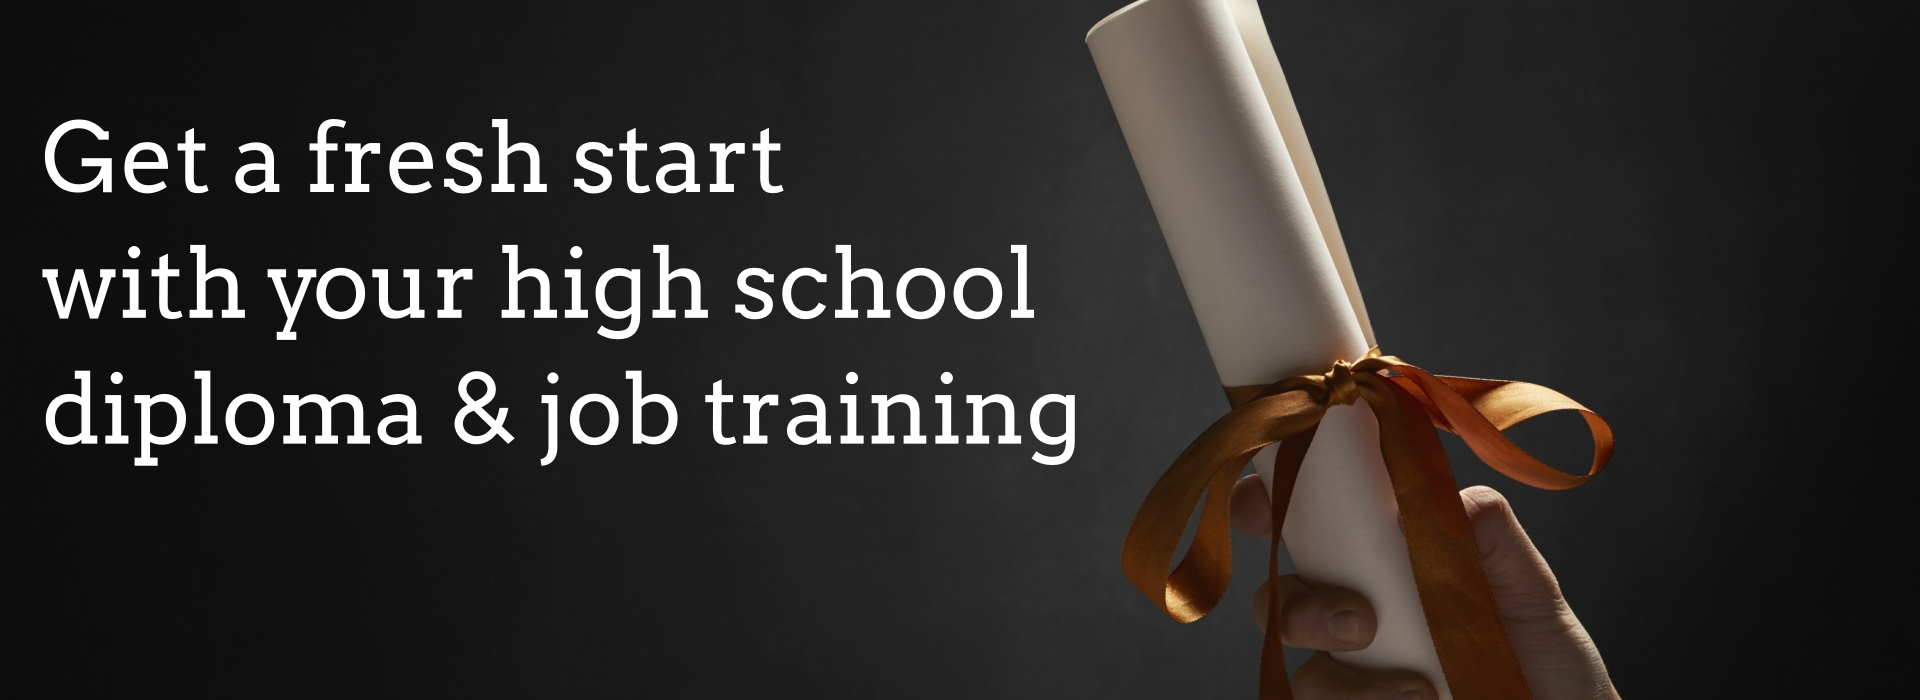 Get a fresh start with your high school diploma & job training